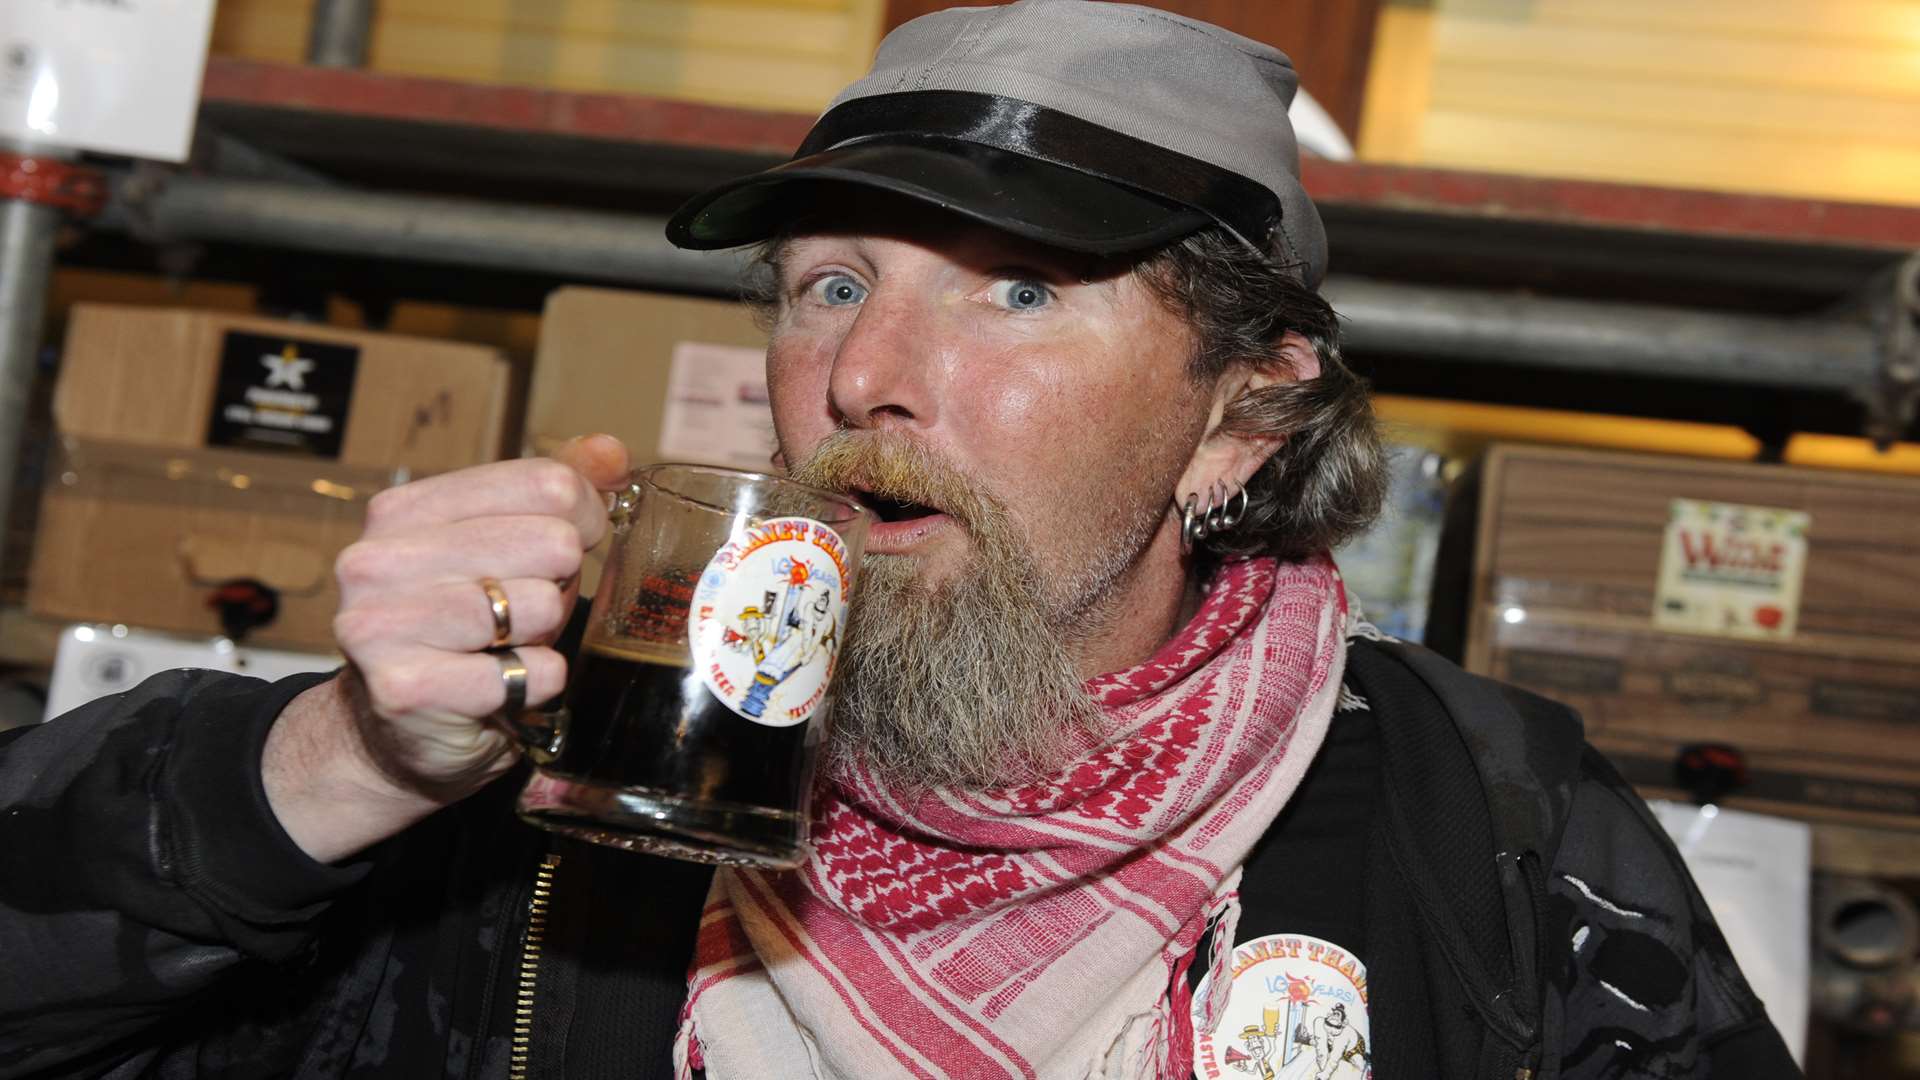 Cheers, Yom Smith at last year's event